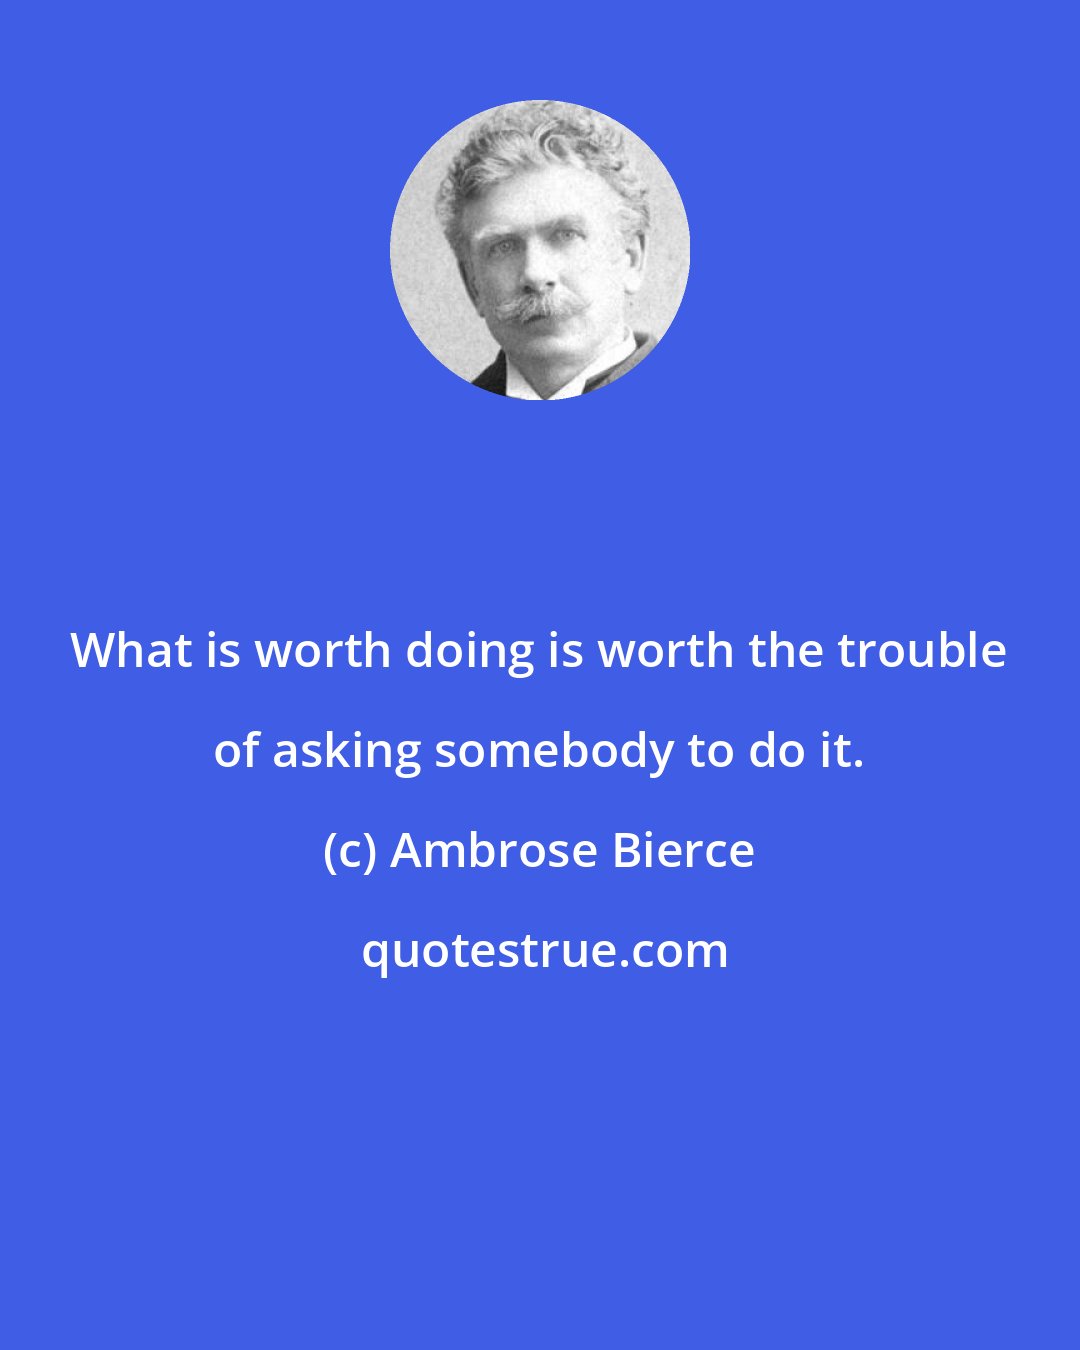 Ambrose Bierce: What is worth doing is worth the trouble of asking somebody to do it.